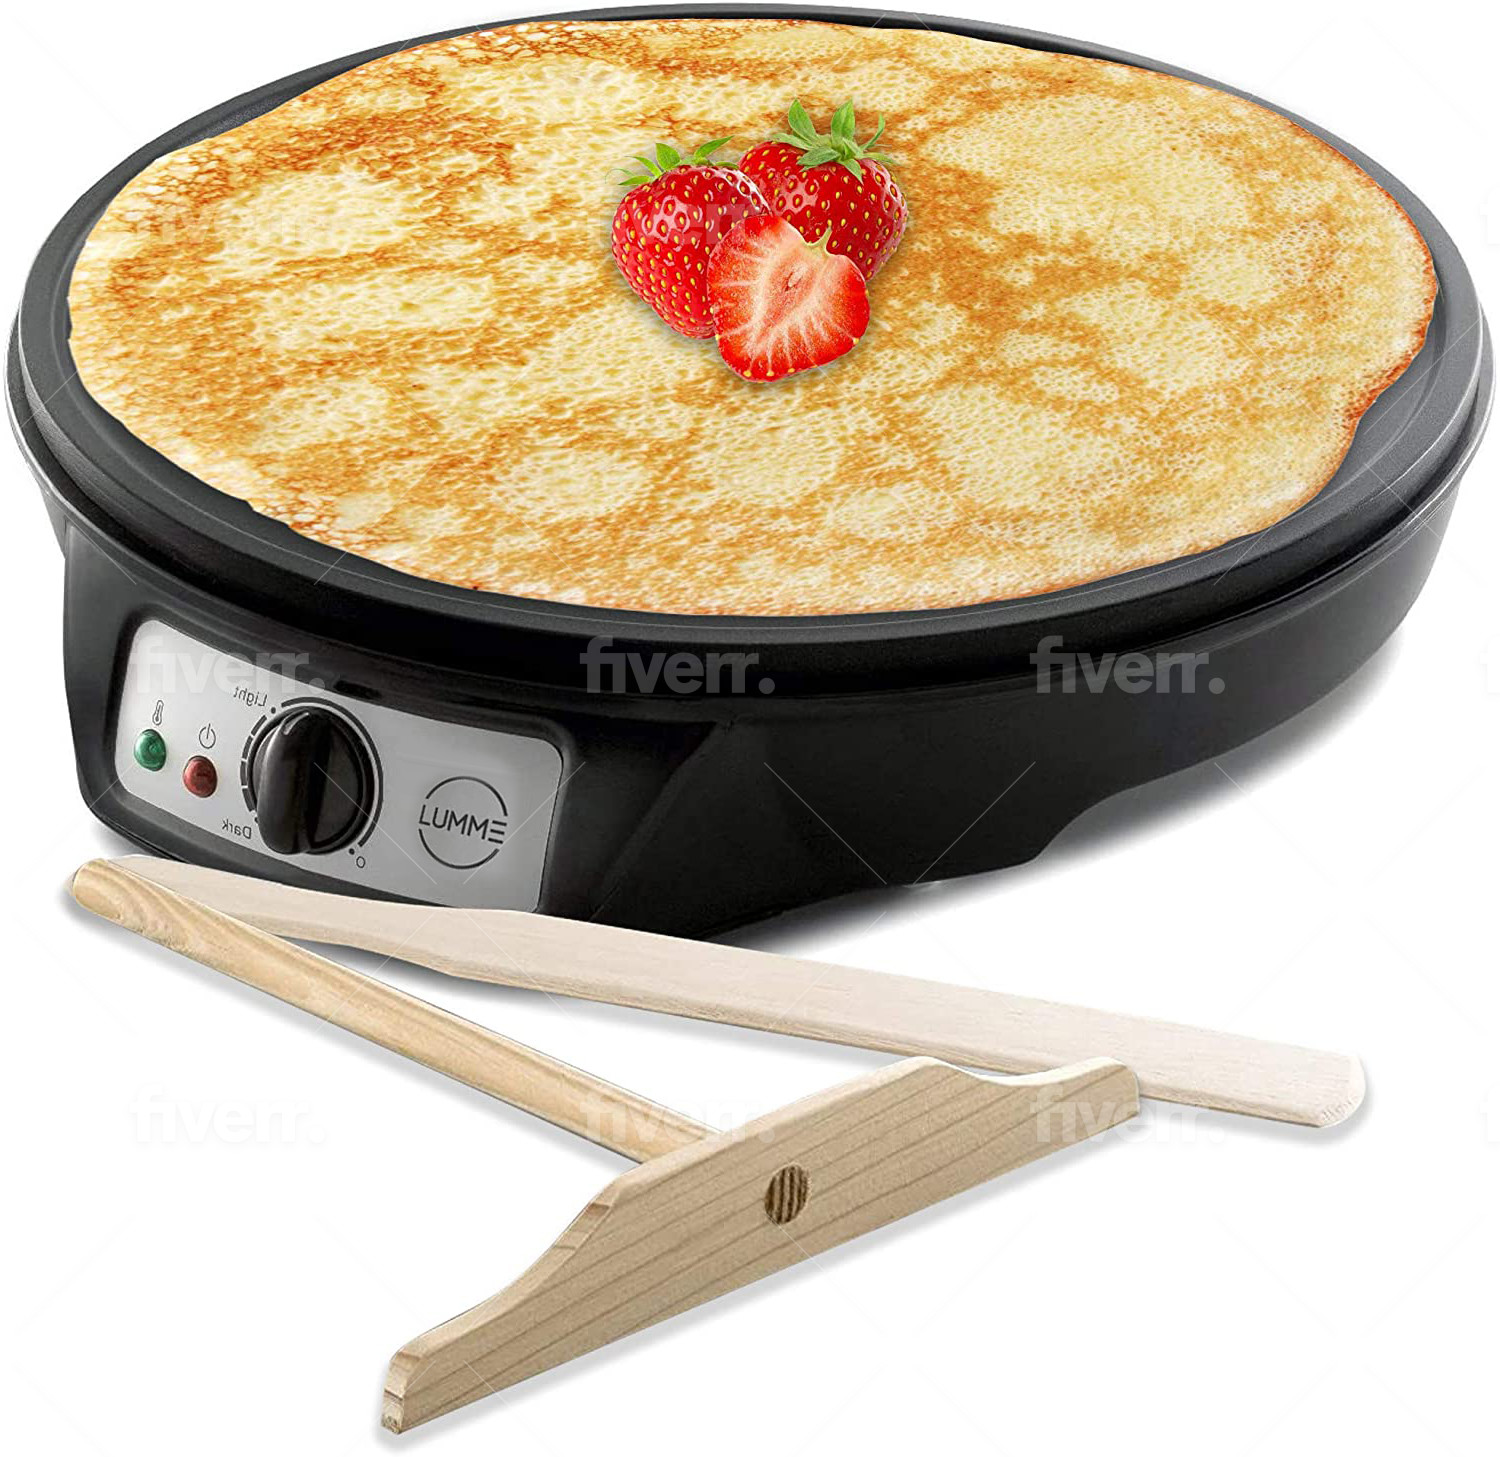 Lumme Crepe Maker Nonstick 12-inch Breakfast Griddle Hot Plate Cooktop  with Adjustable Temperature Control and LED Indicator Light, Includes  Wooden Spatula and Batter Spreader.